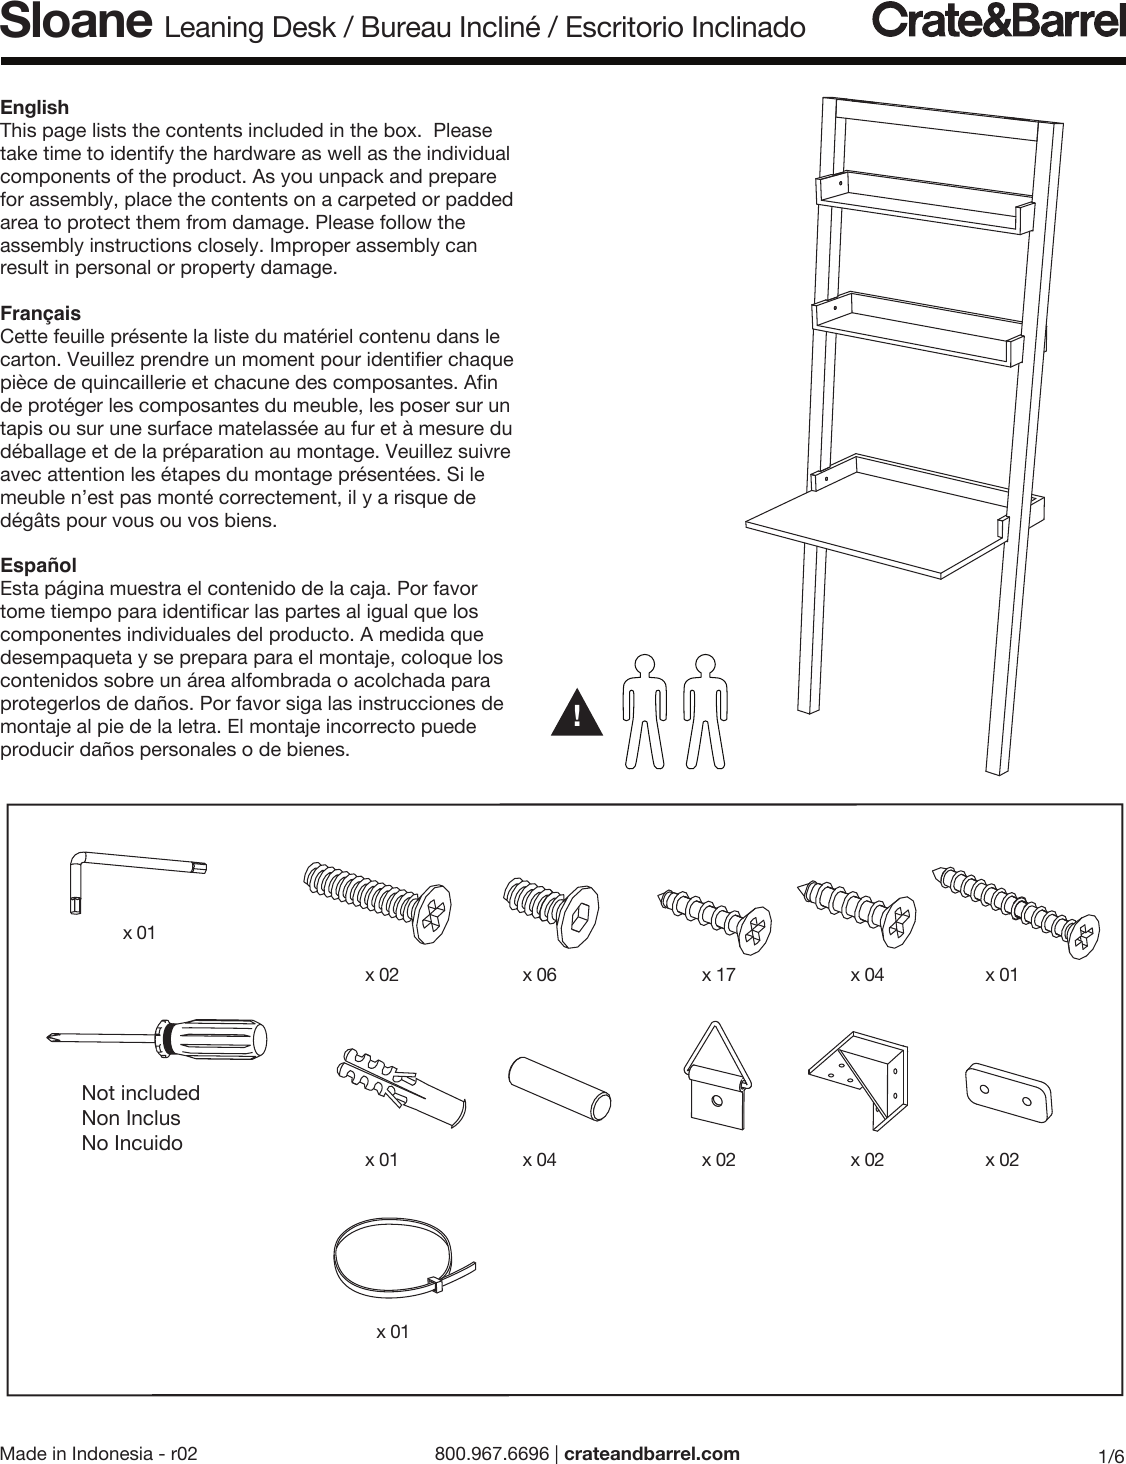 Crate Barrel 898 Sloane Leaning Desk Ml Assembly Instructions From And